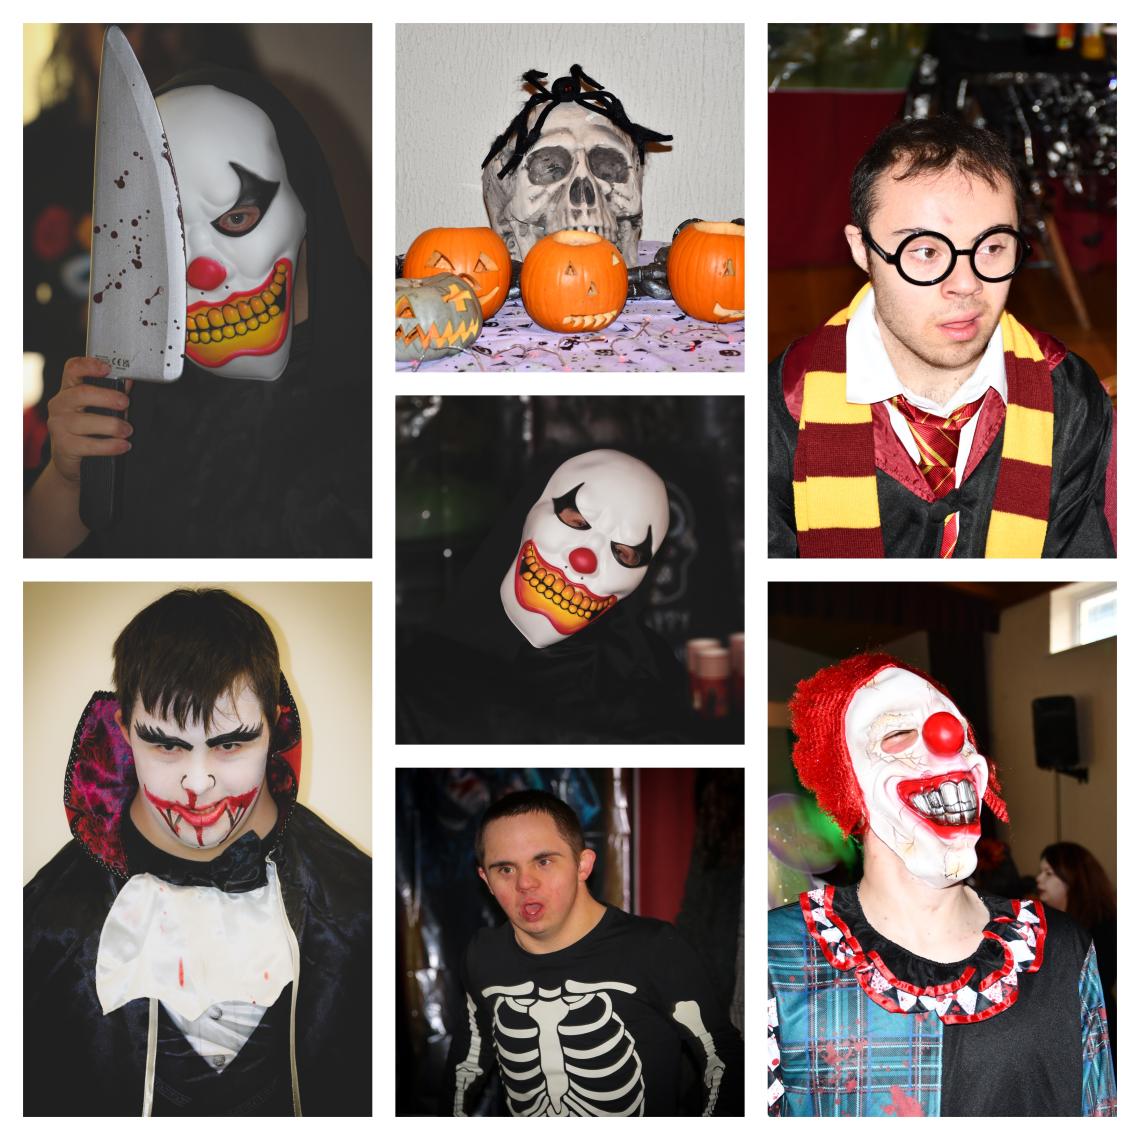 A collage of images showing people dressed up for Halloween.